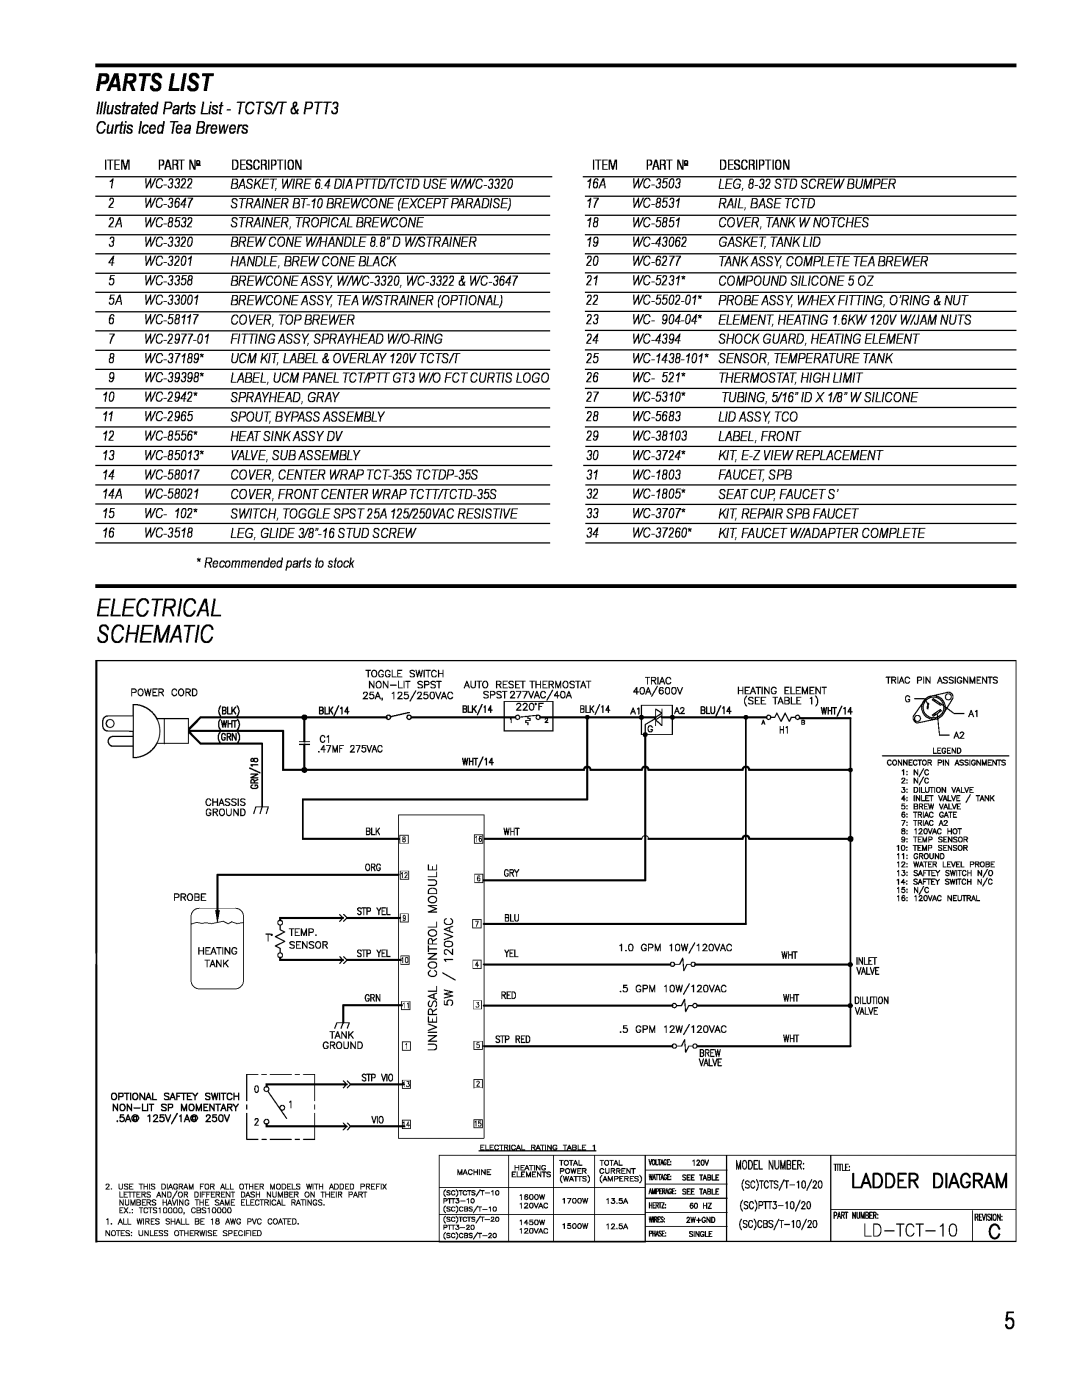 Wibur Curtis Company TCTS/T, PTT3 specifications Parts List, Electrical, Schematic 